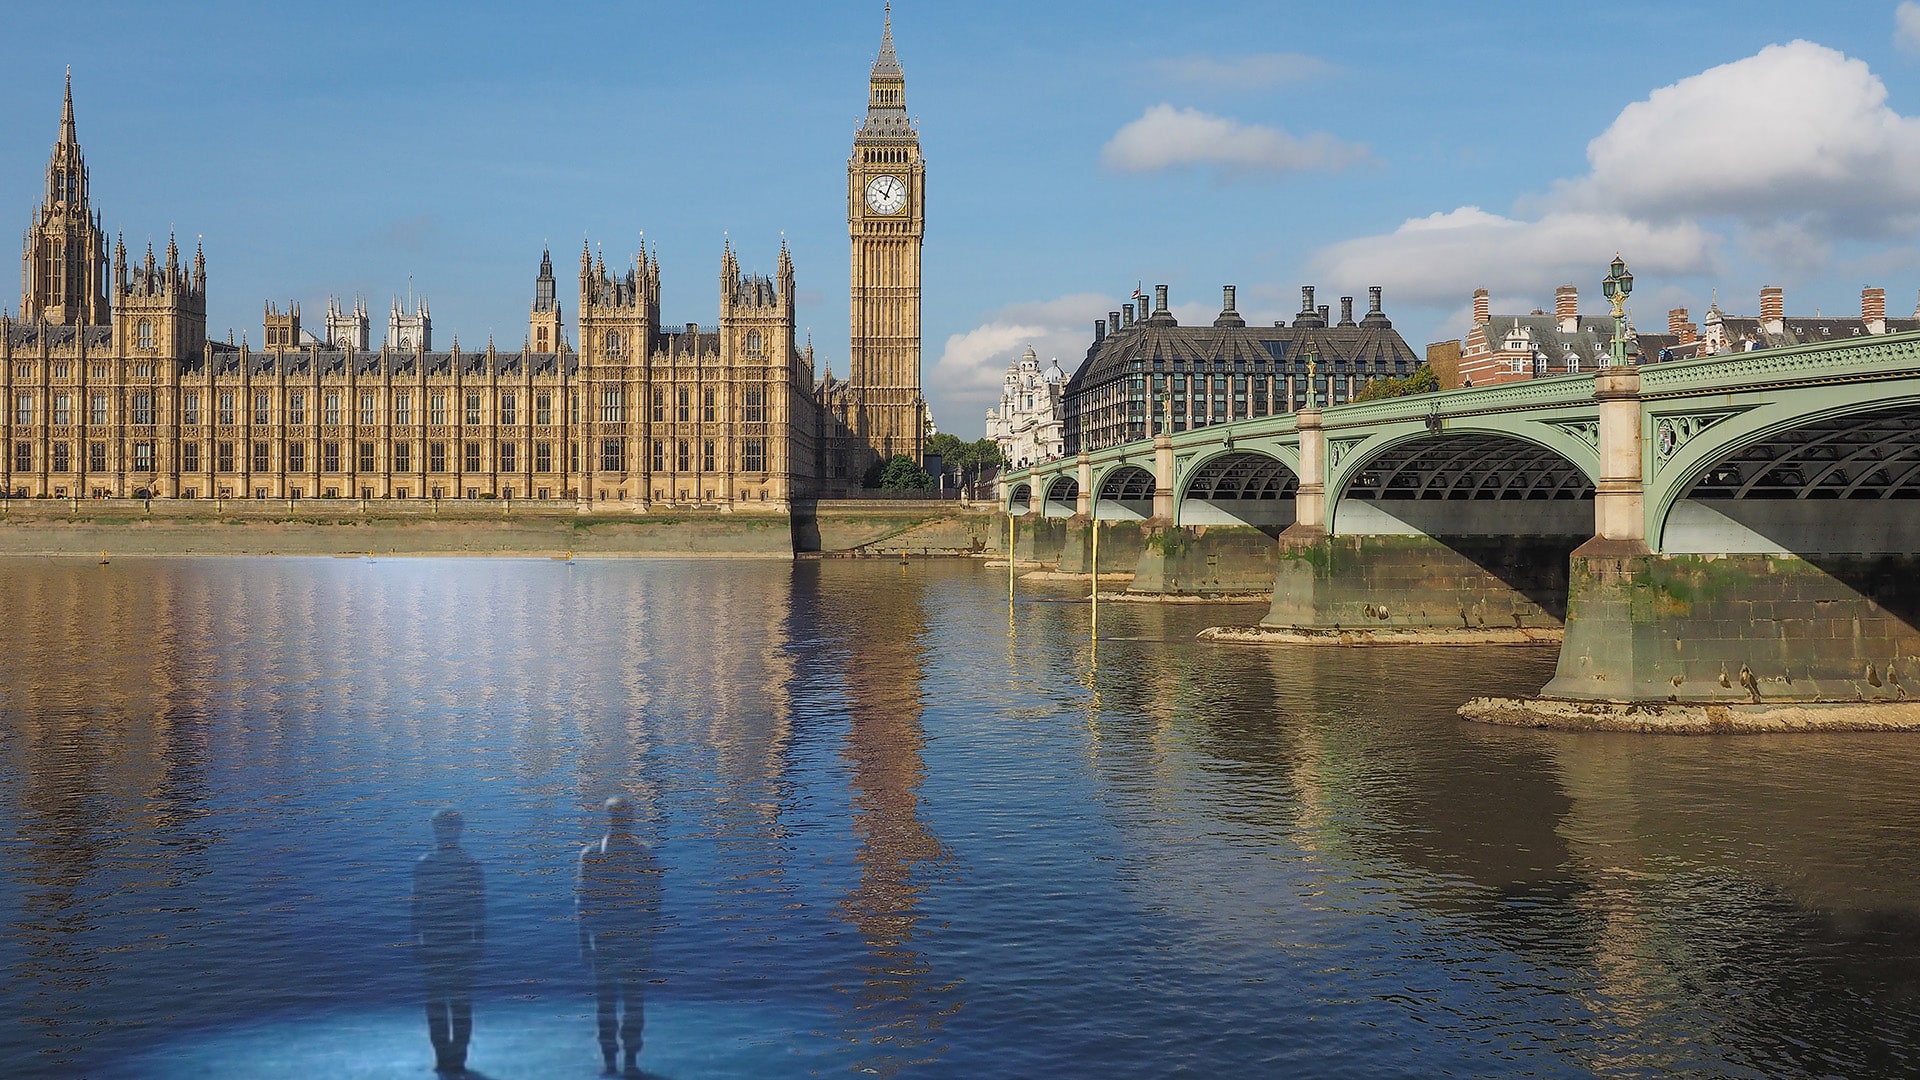 From England with Love artwork. A photograph looking out over The Thames River and Westminster Bridge, a long green metal bridge, in front of the Palace of Westminster, a large light brown stone building, and Big Ben, a large light brown stone clock tower, in London, England. At the bottom left-hand corner of the artwork, two silhouetted figures stand in the river water.